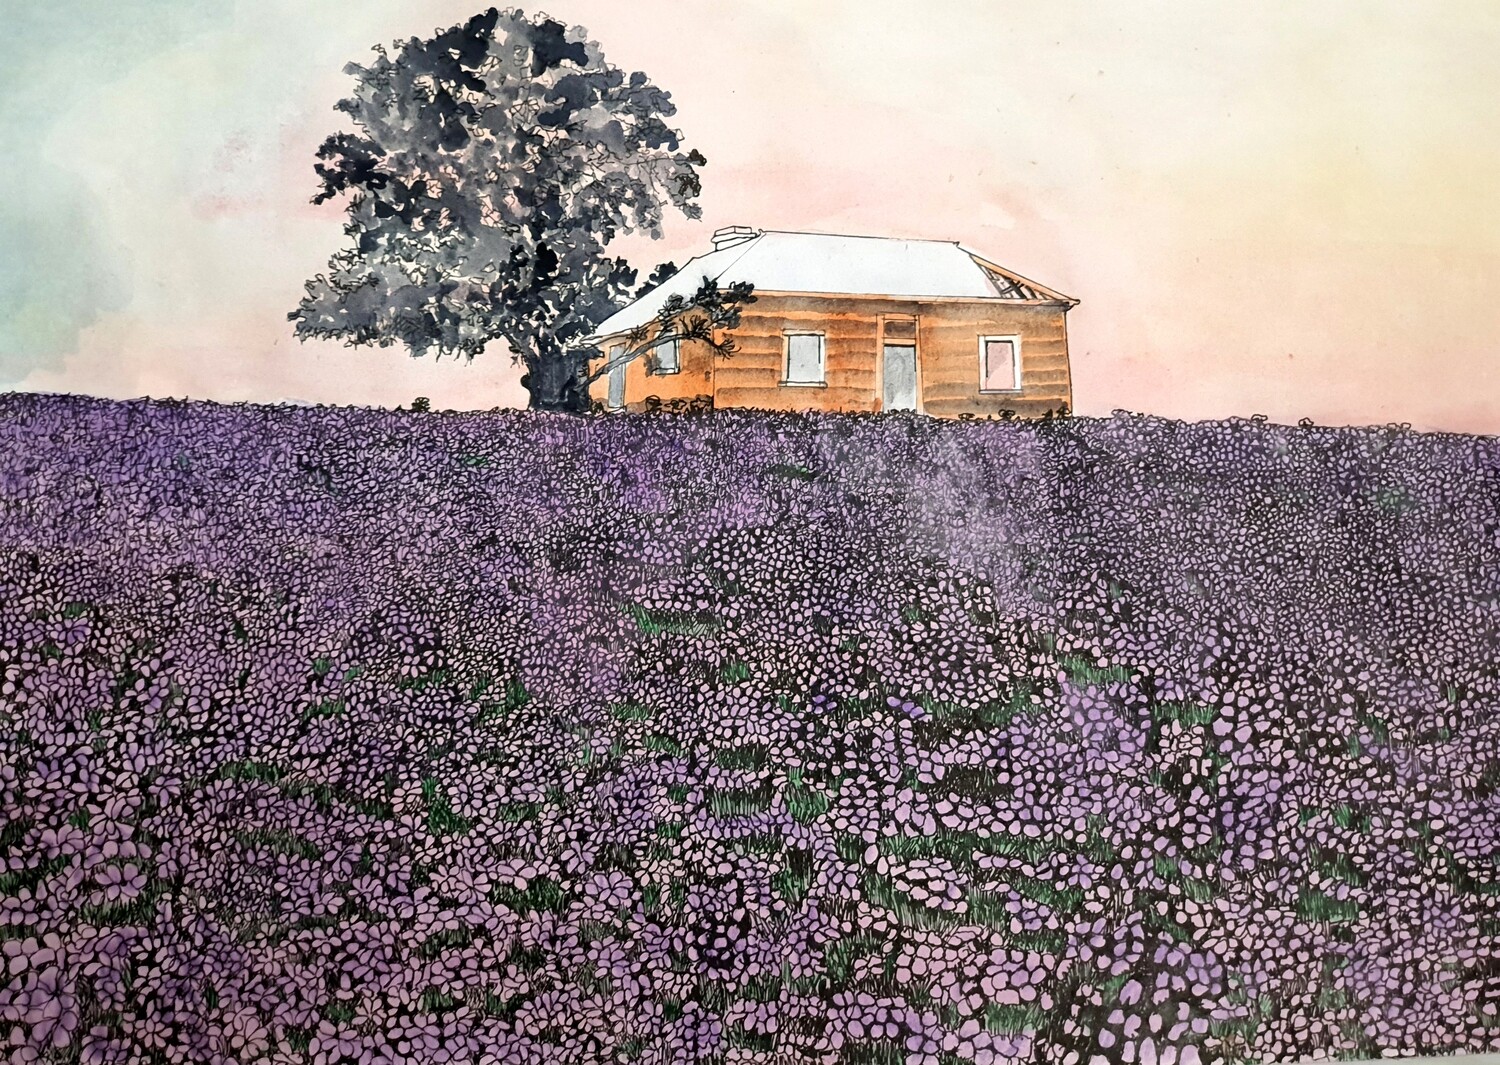 "Derelict House near Armidale in a paddock of Patterson's Curse"  -High Quality Art Print